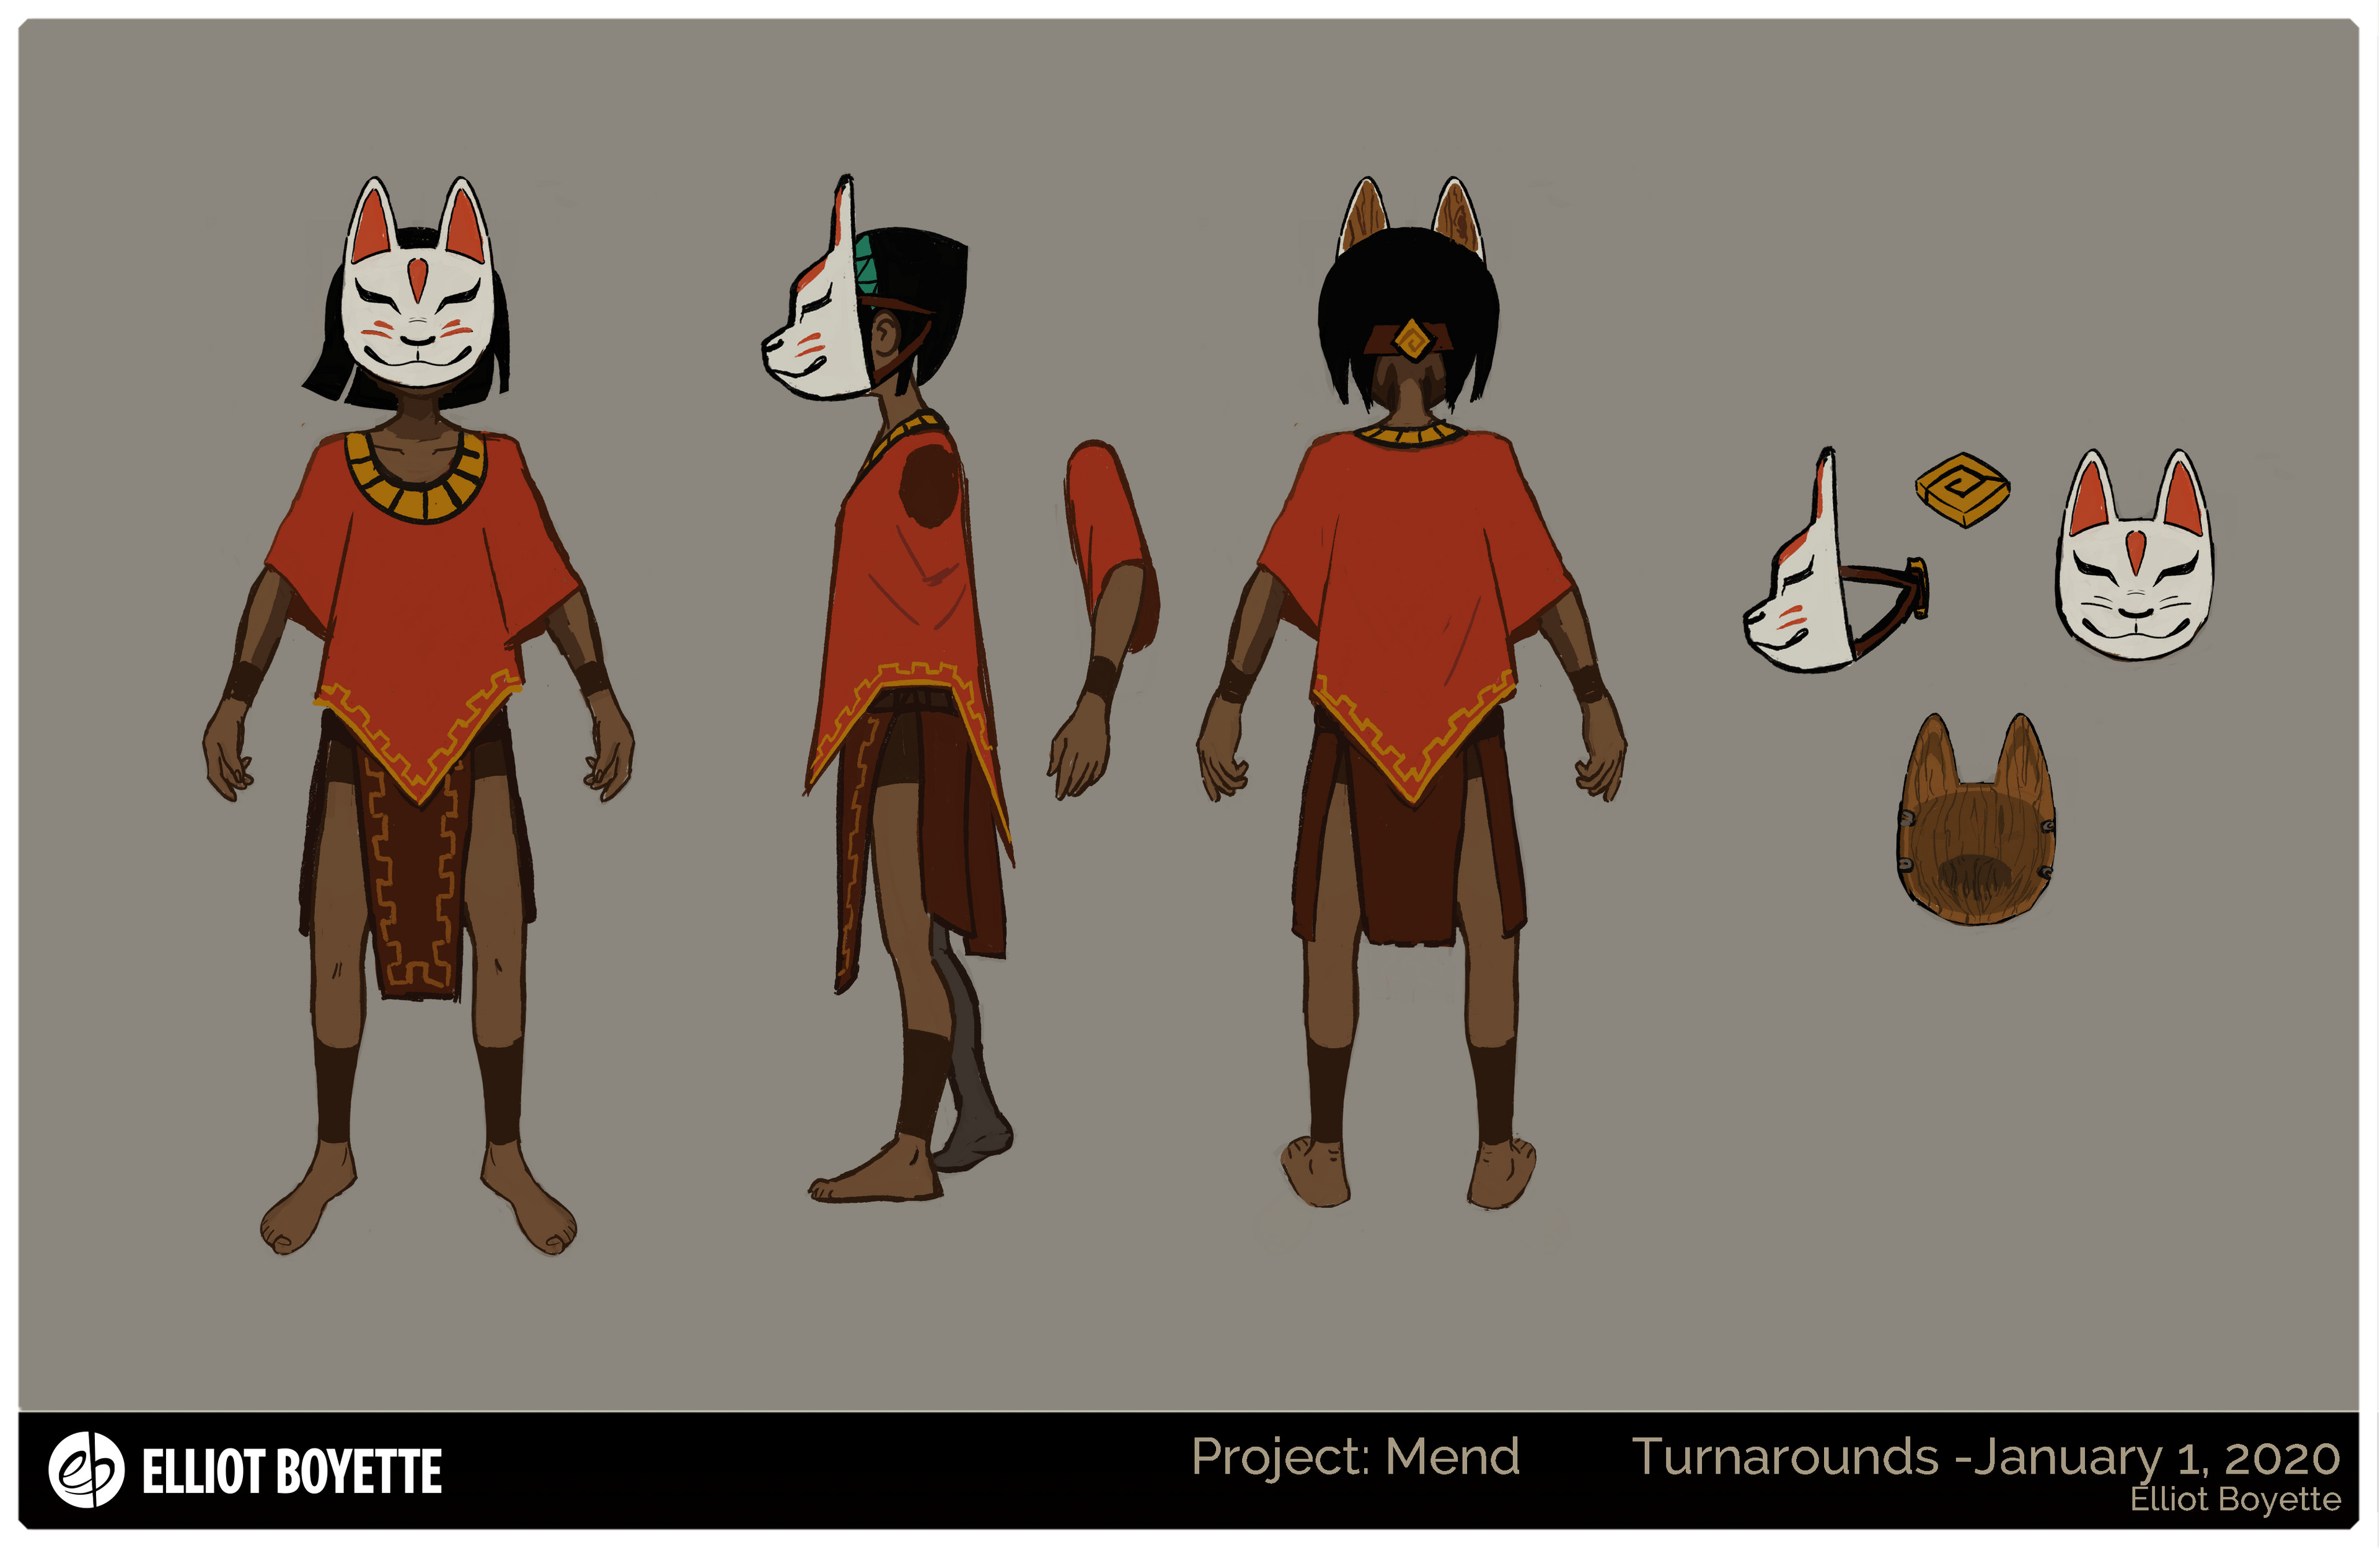 Original model sheet. This version was deemed too off culture but we wanted to retain some aspects of the design that worked like the bright color and the fox ears. 